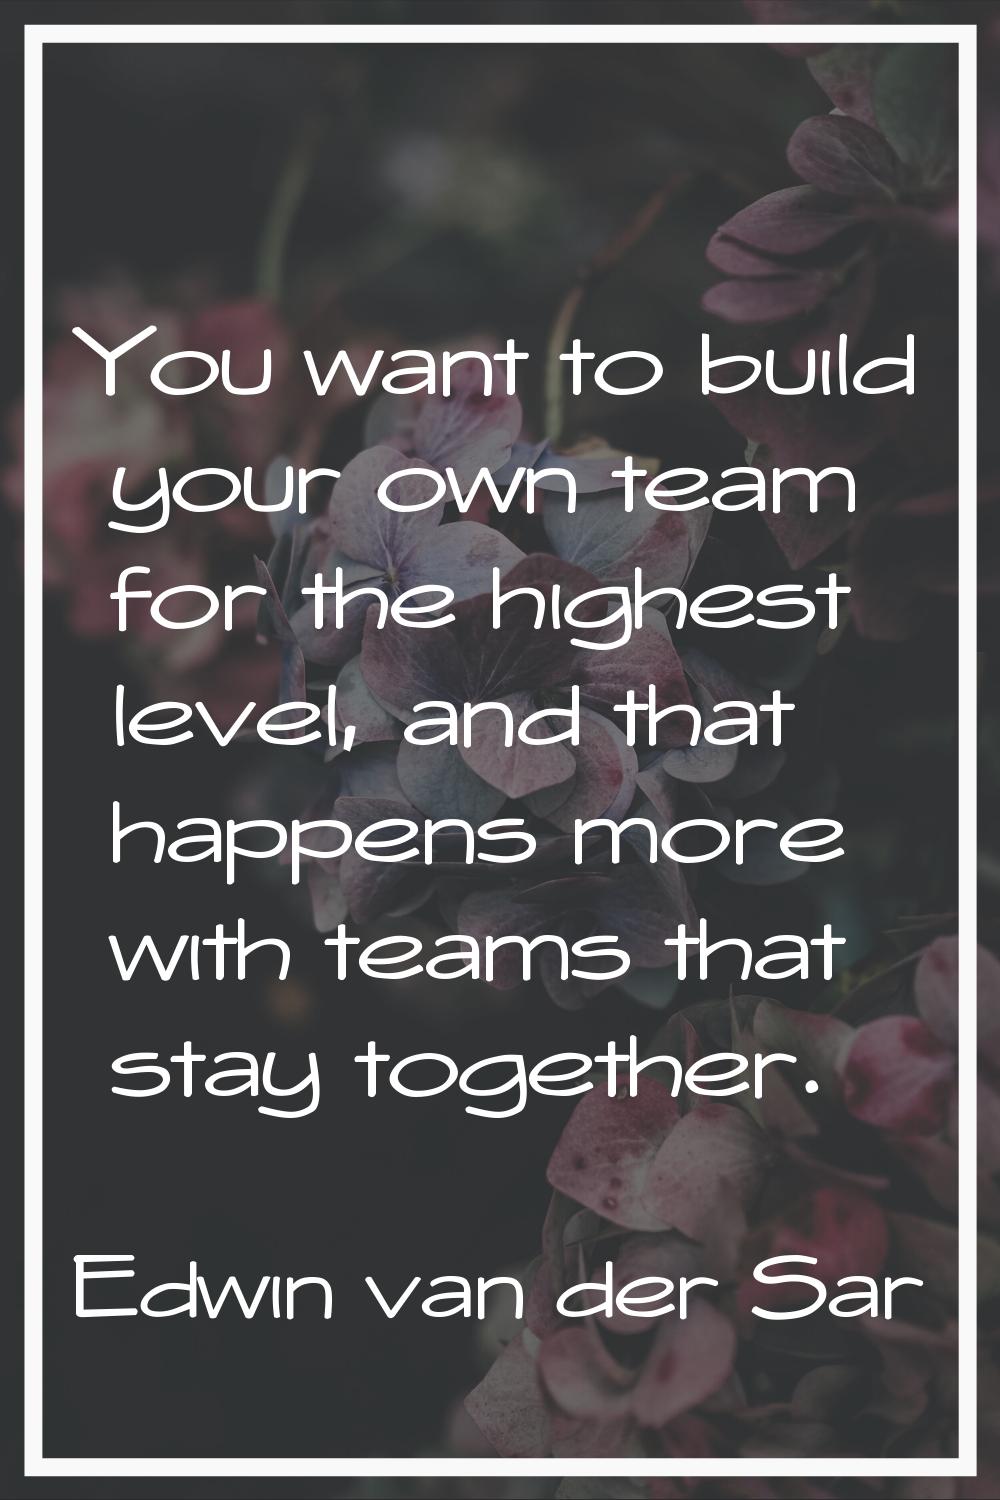 You want to build your own team for the highest level, and that happens more with teams that stay t